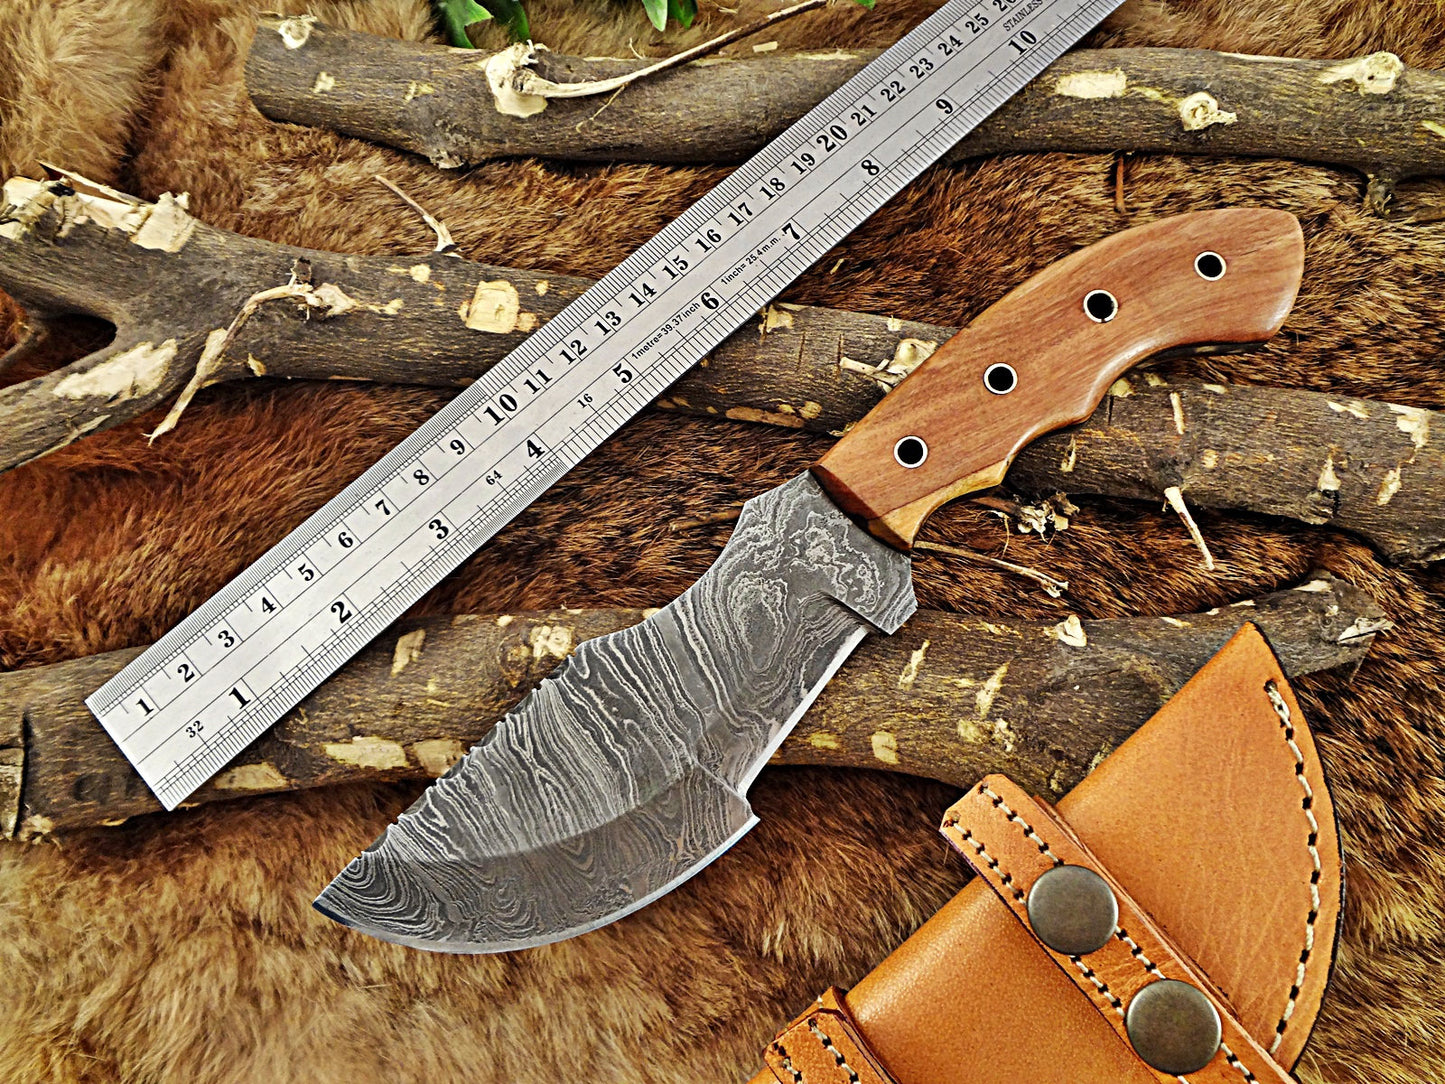 10"Long tracker knife hand forged twist pattern full tang Damascus steel, Natural Rose wood with pipe hole scale, Cow hide leather sheath